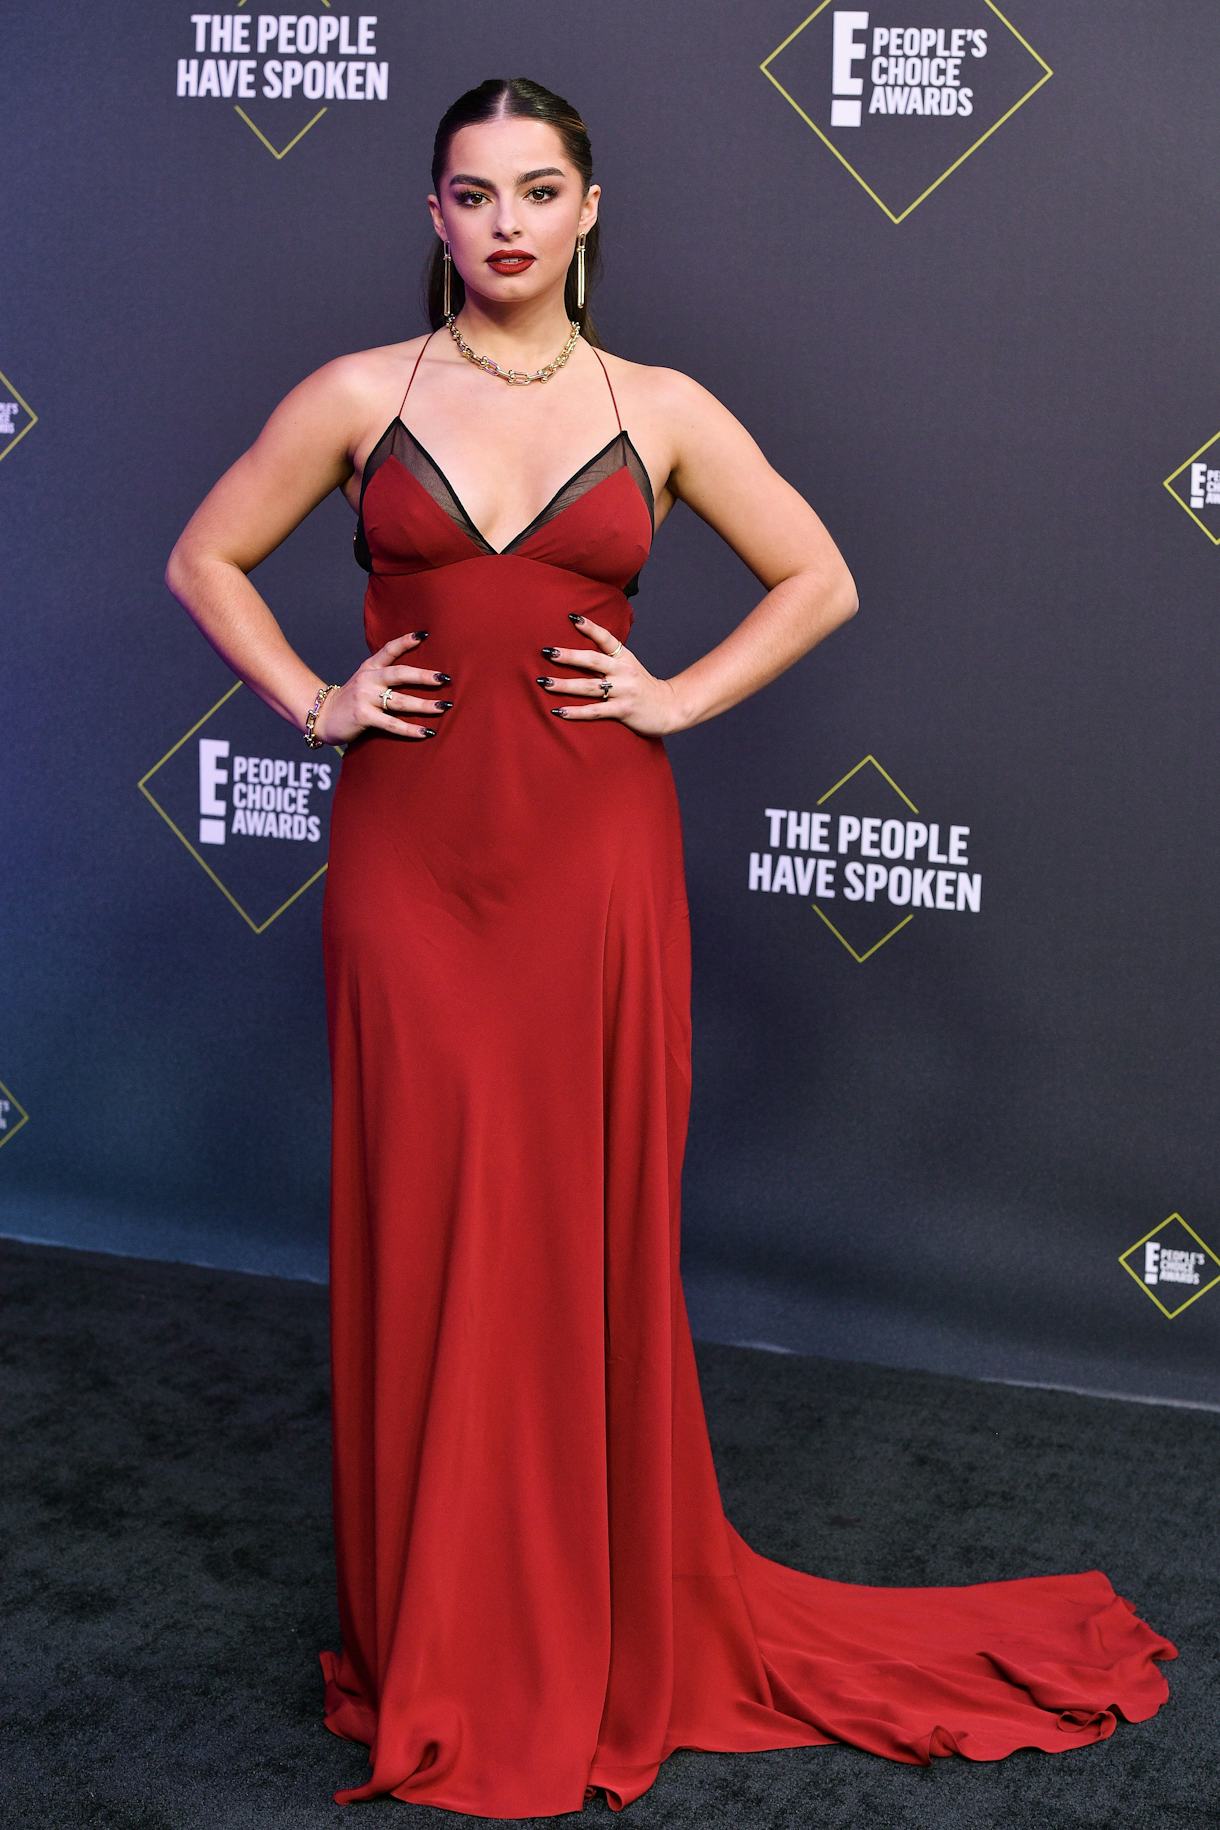 Addison Rae's 2020 People's Choice Awards Dress Has Me Seeing Red